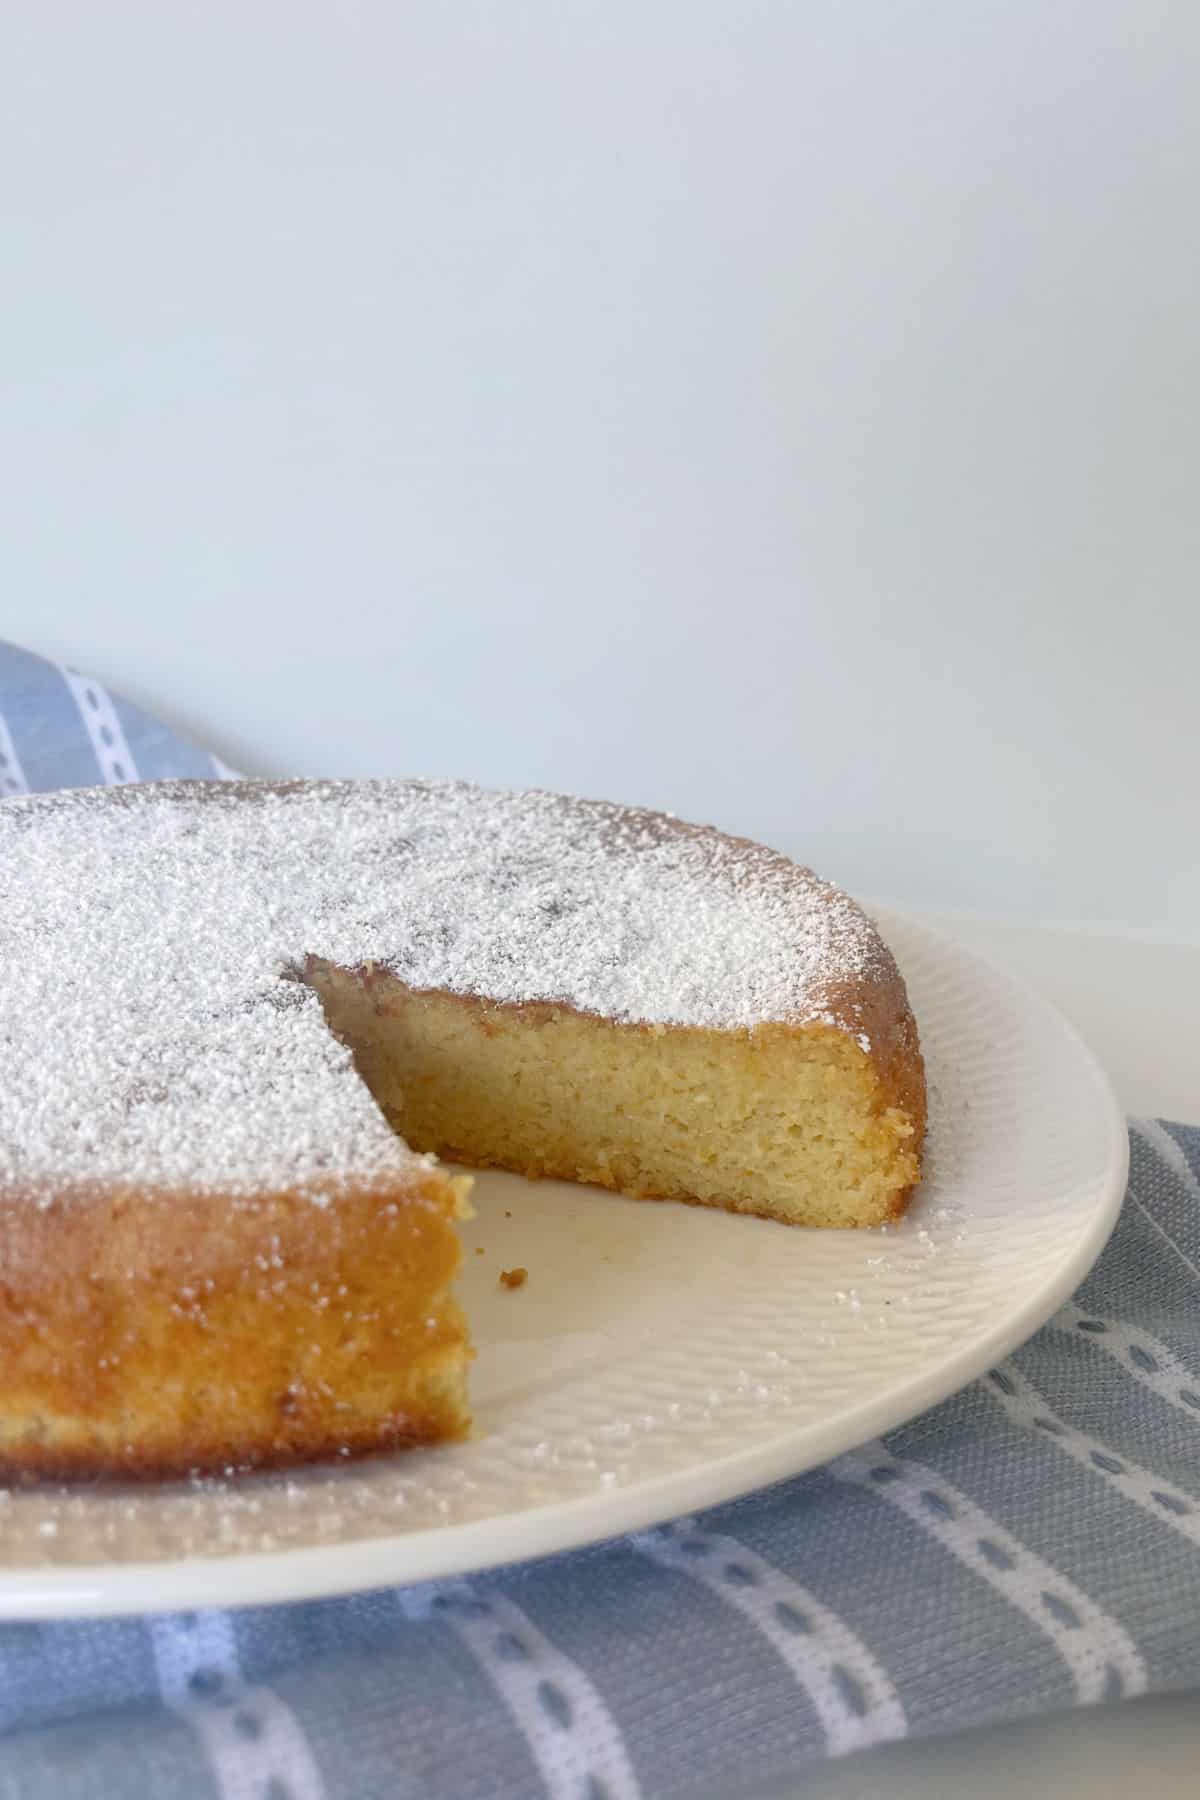 Whole Orange Cake dusted with icing sugar sitting on a white plate.